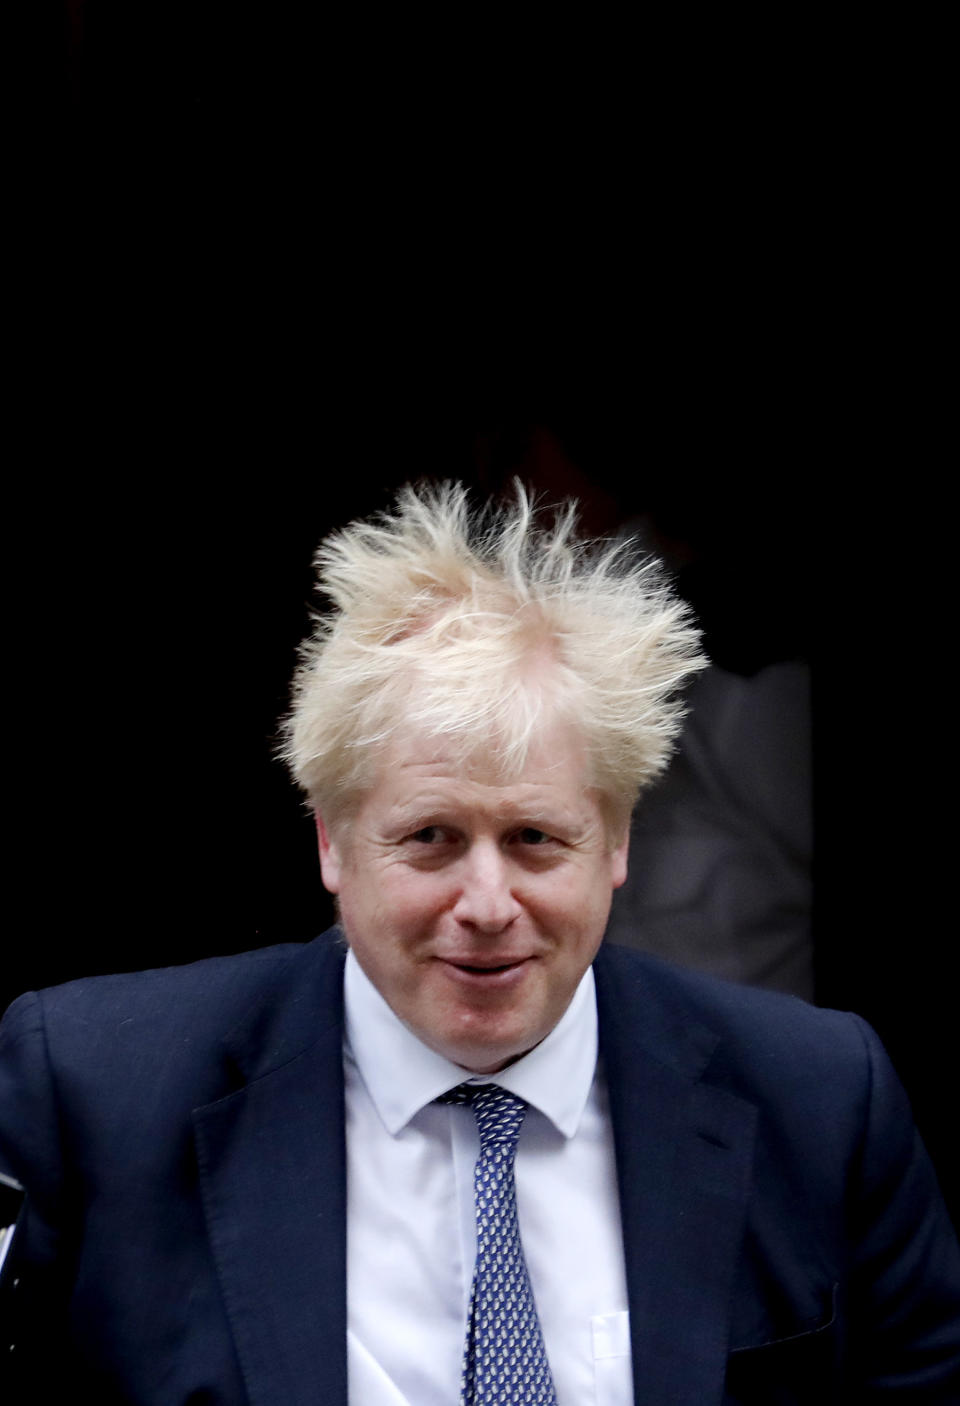 Britain's Prime Boris Johnson leaves 10 Downing Street to attend the weekly Prime Ministers' Questions session, in parliament in London, Wednesday, Oct. 23, 2019. (AP Photo/Frank Augstein)